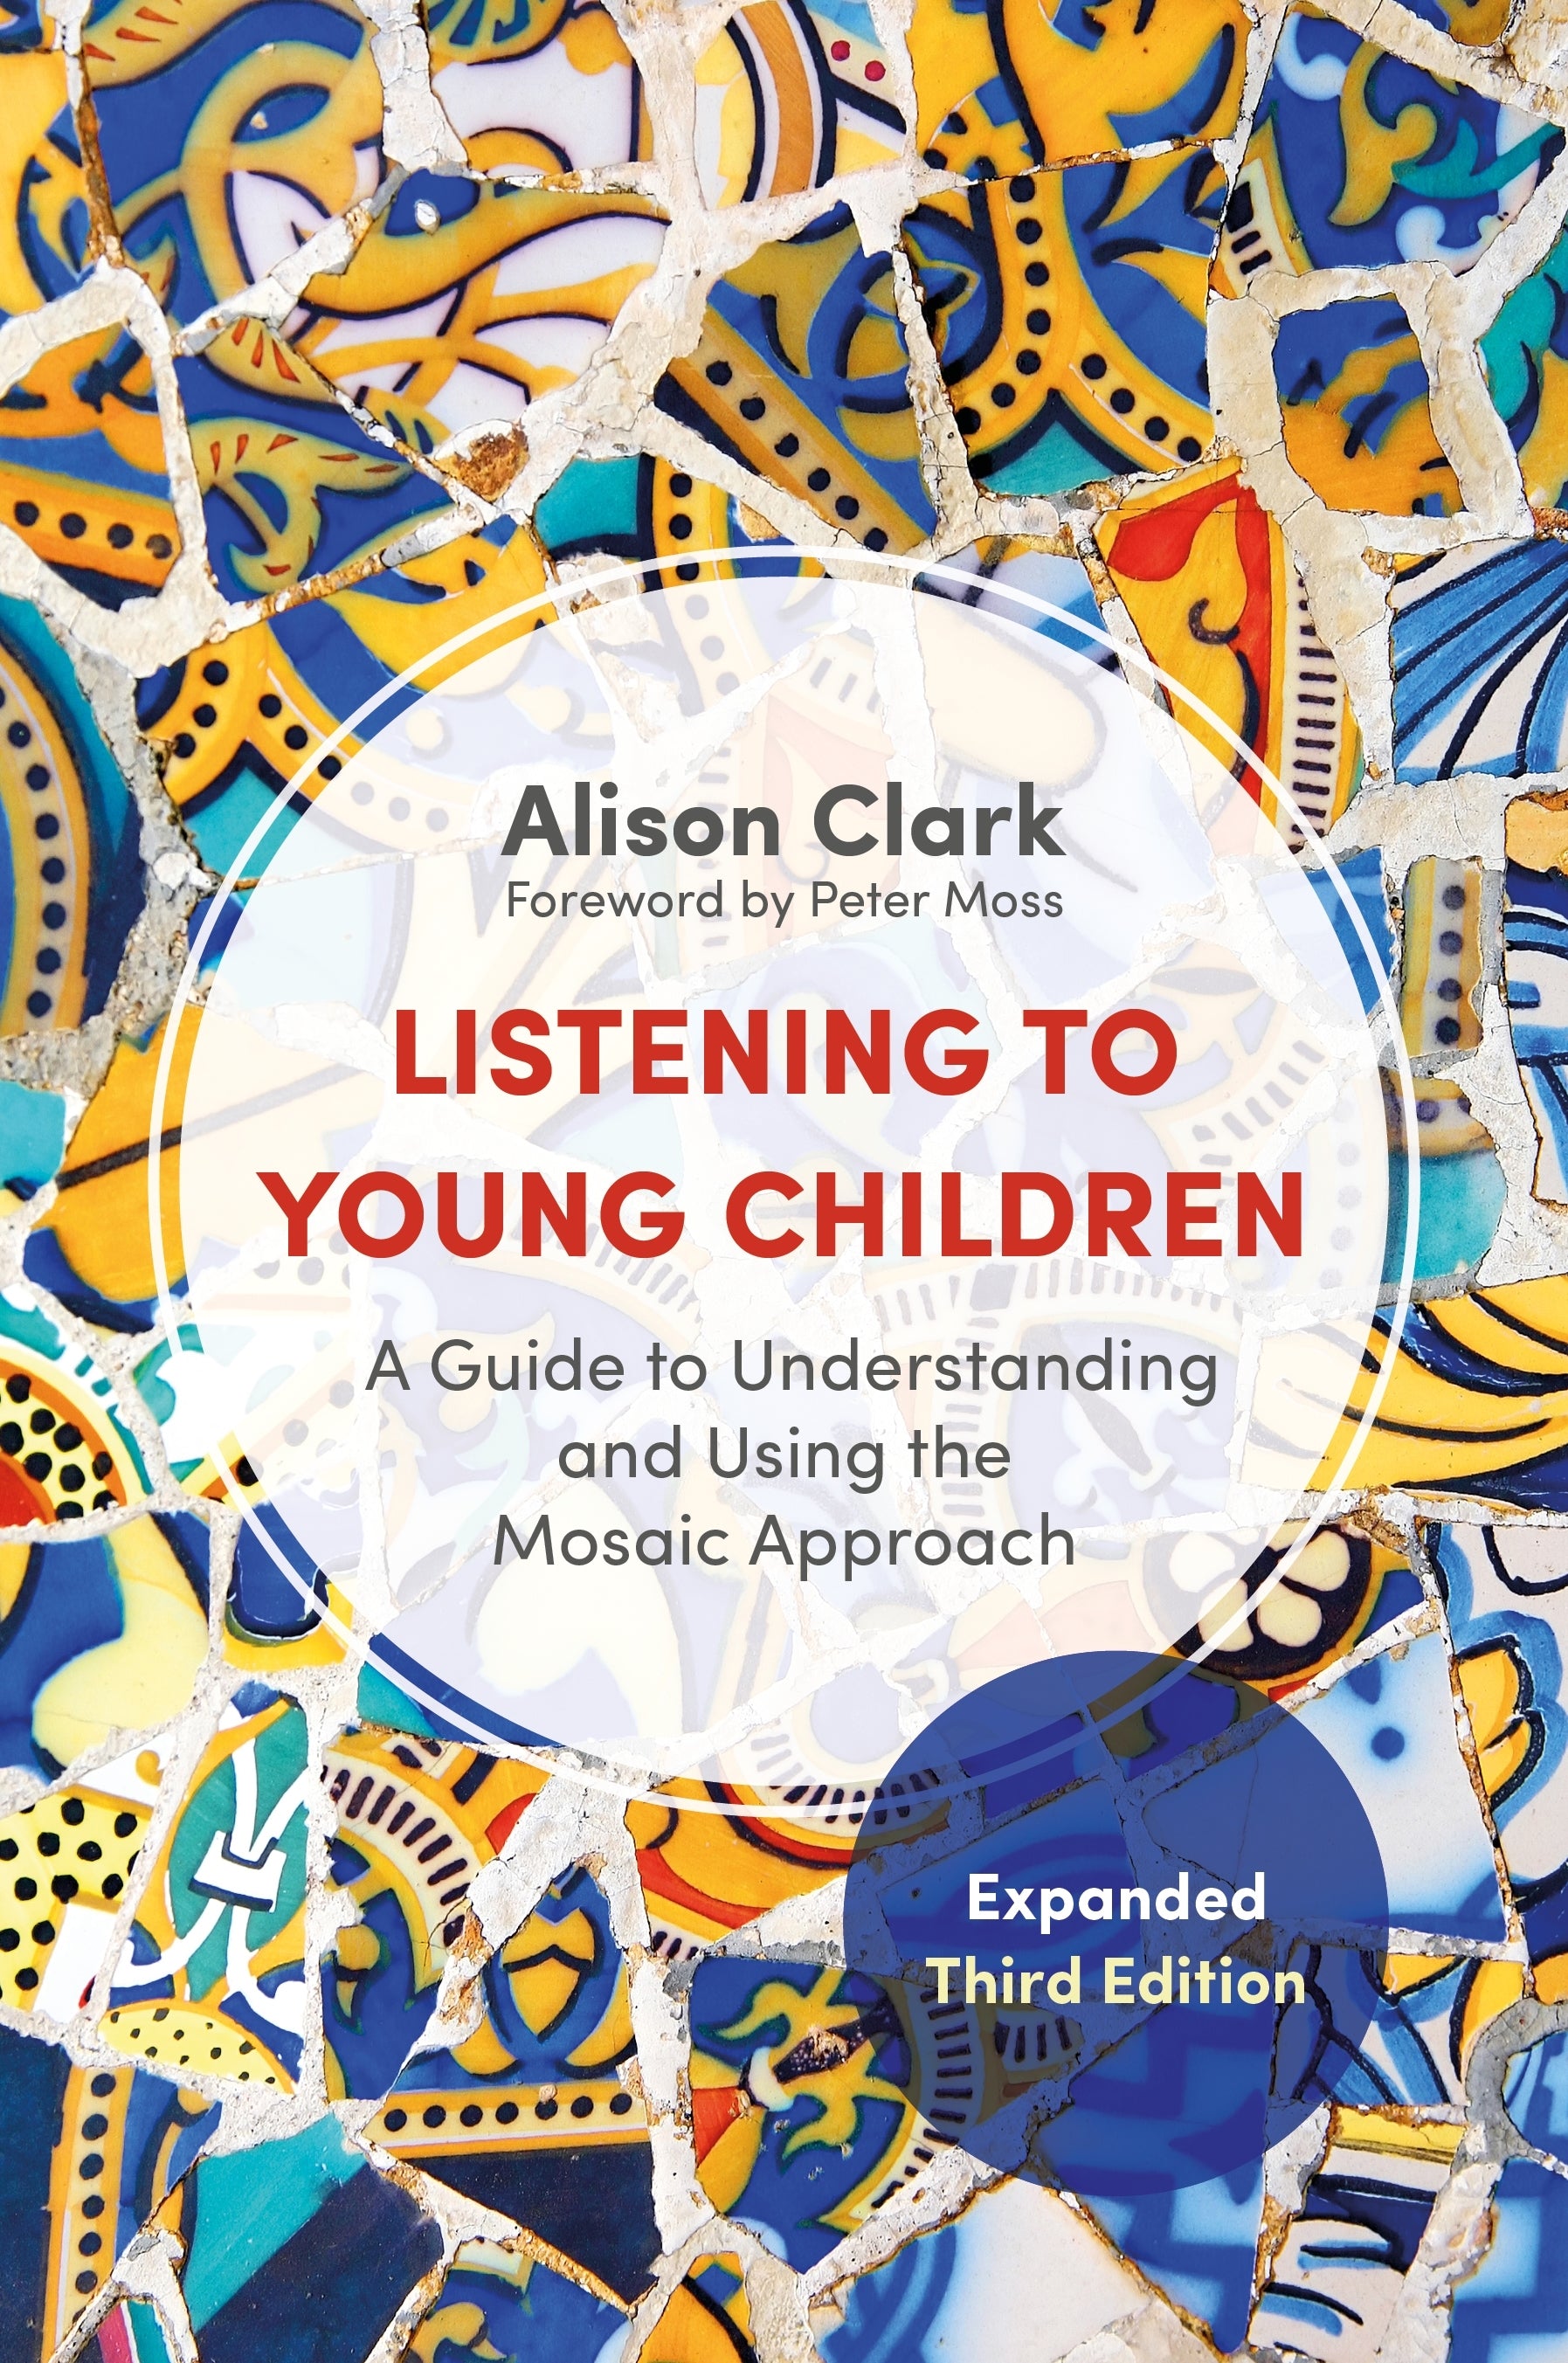 Listening to Young Children, Expanded Third Edition by Peter Moss, Alison Clark